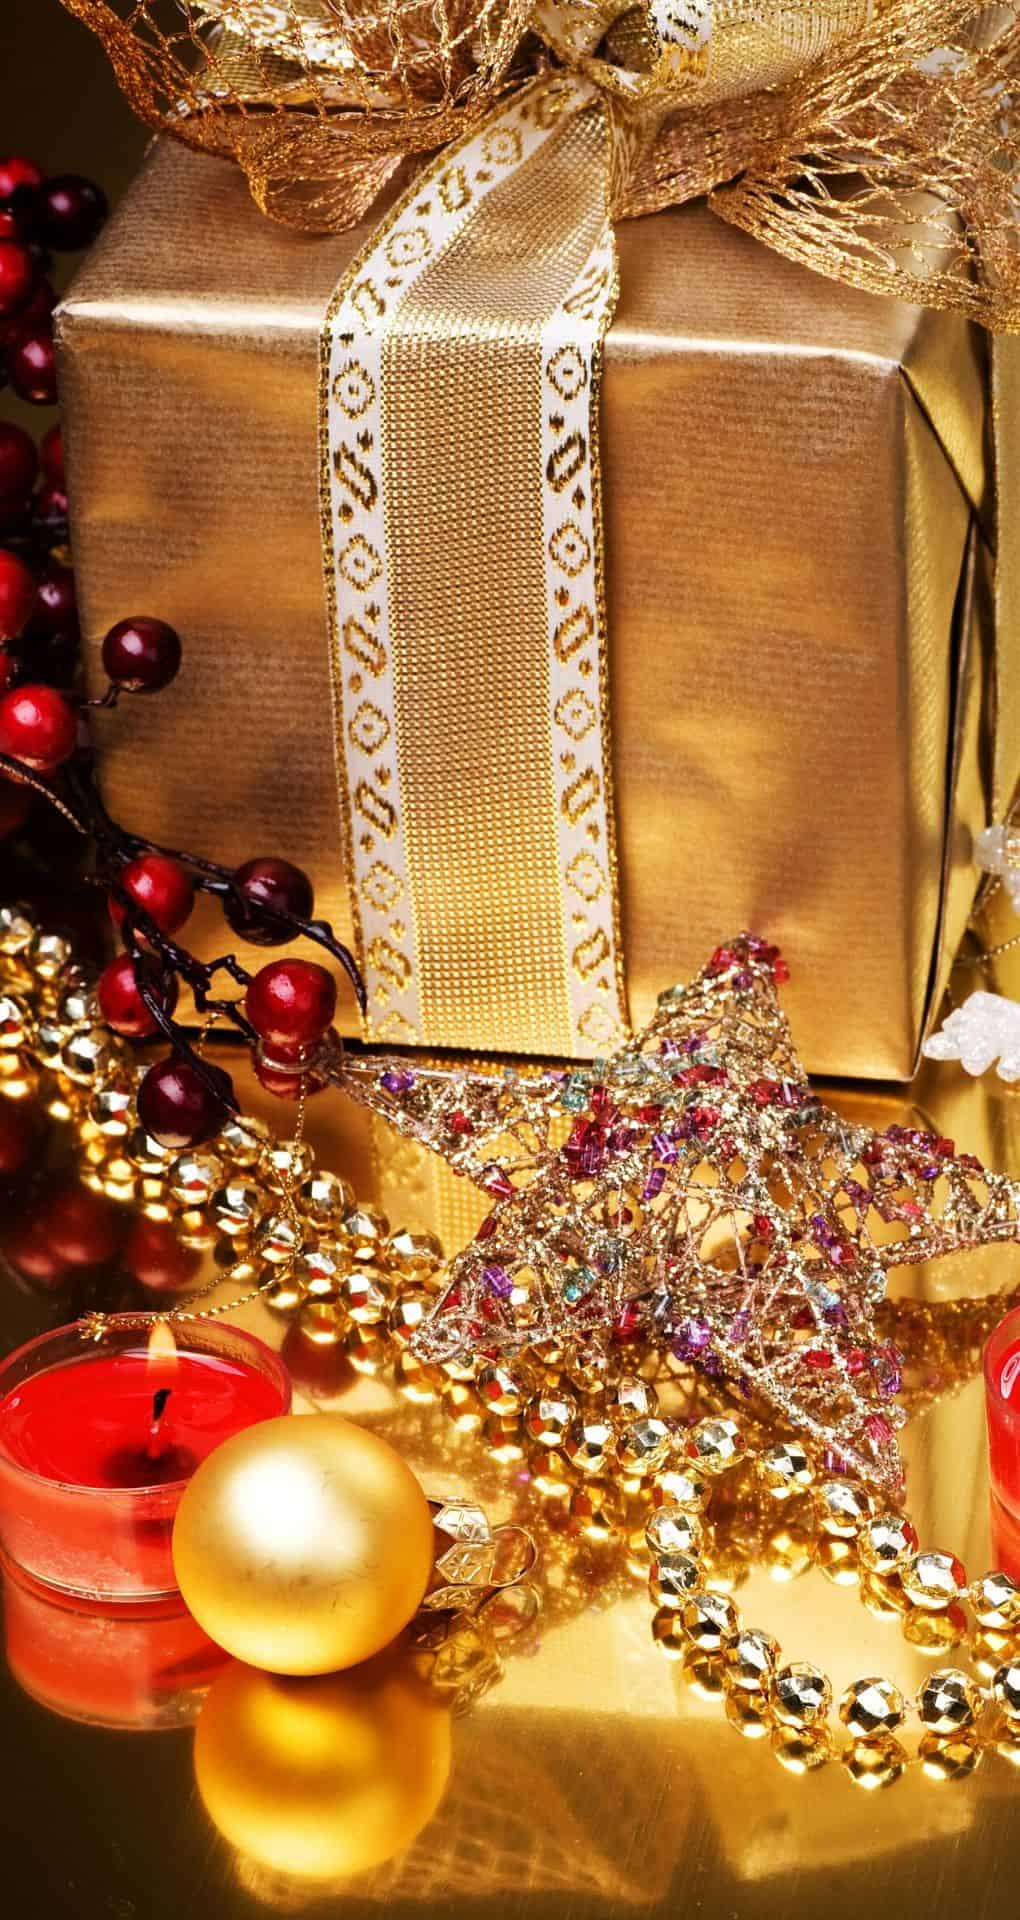 Golden gift box with a bow, golden beads, red candles and a star. - Christmas iPhone